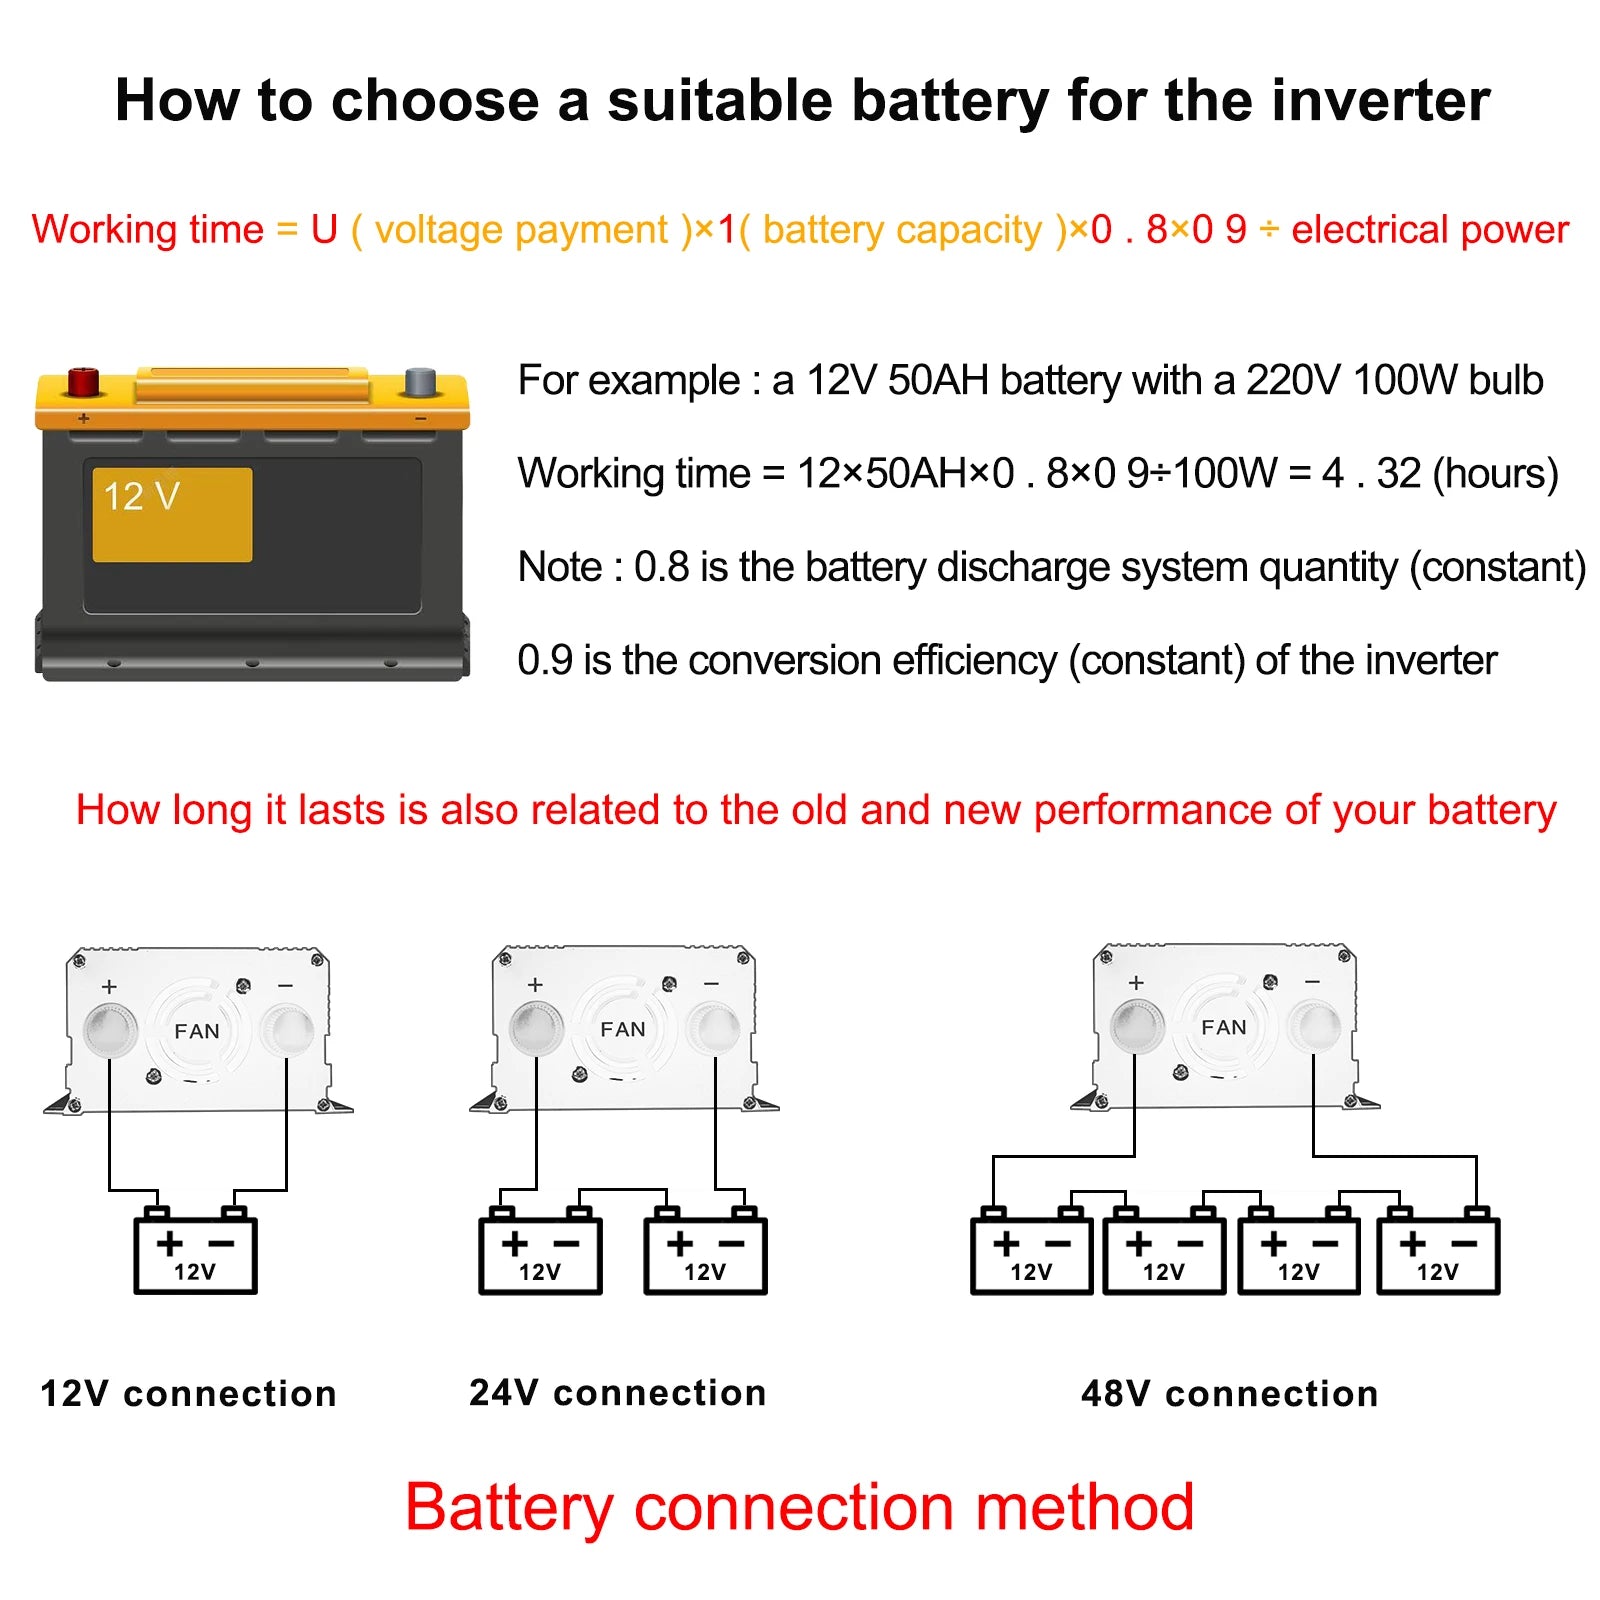 Pure Sine Wave Inverter, Calculates battery runtime based on voltage, capacity, and power consumption for optimal inverter performance.